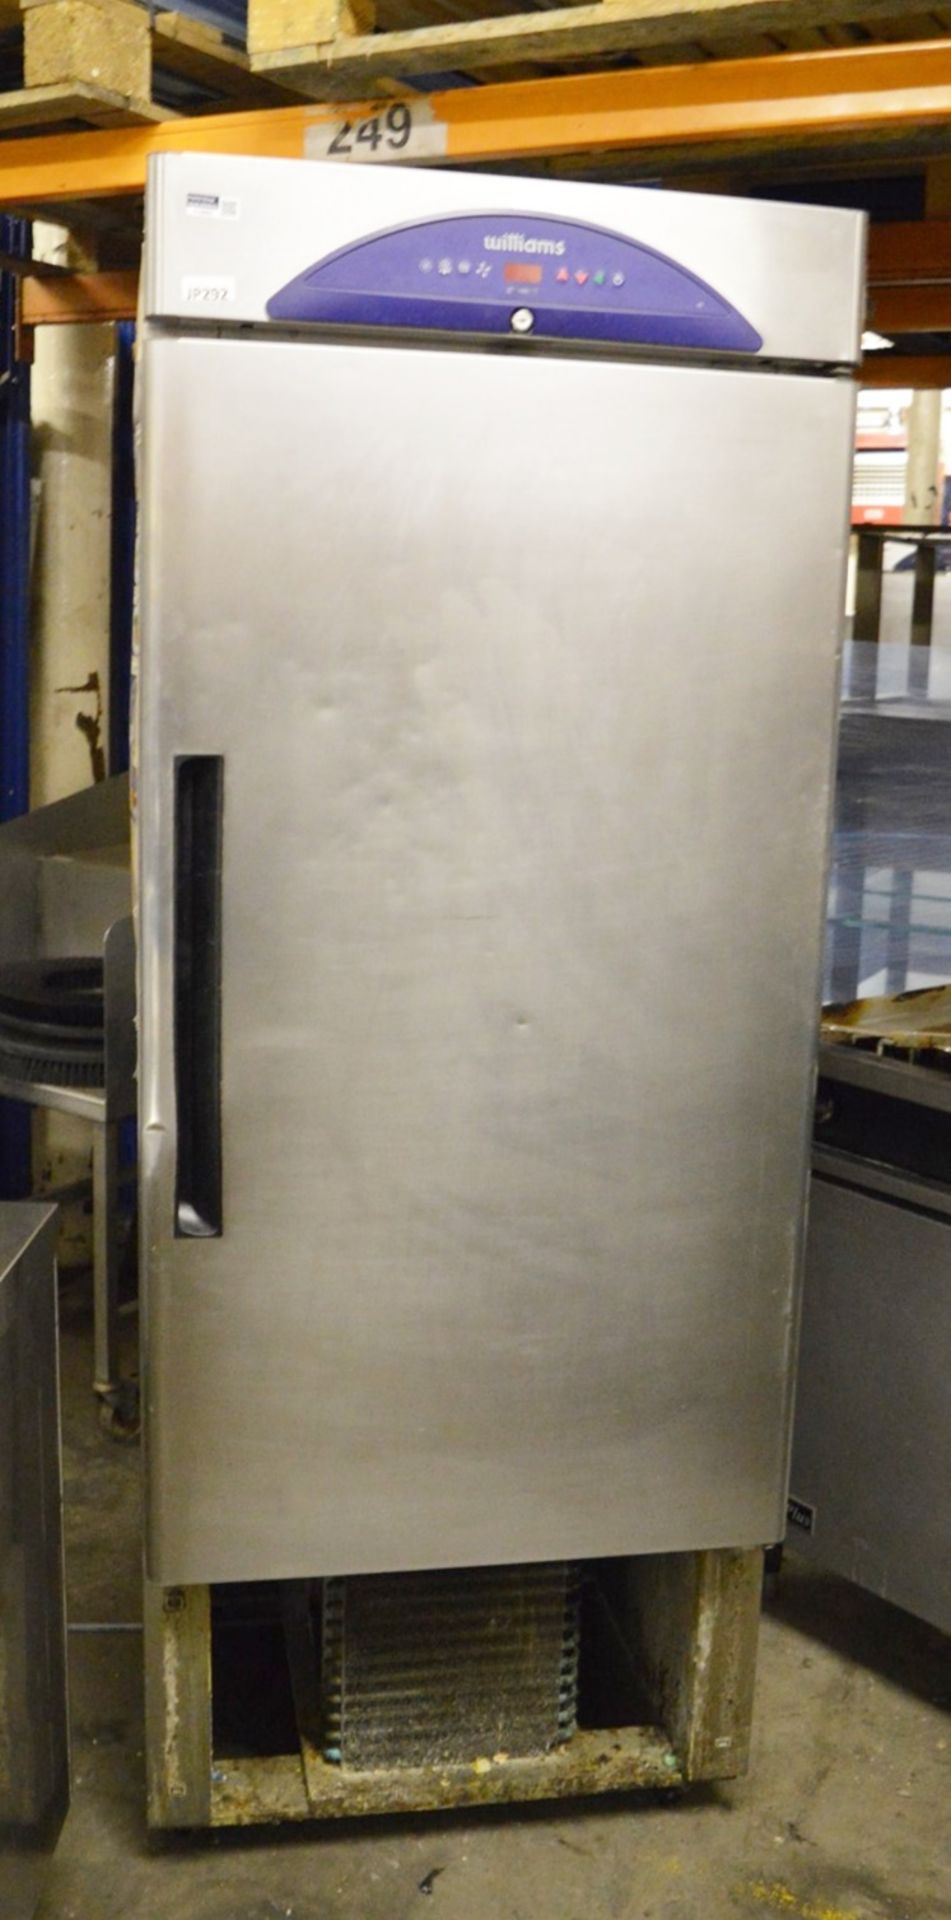 1 x Williams Single Door Upright Refrigerator - Model HZ16-WB - Stainless Steel Finish - CL232 - Ref